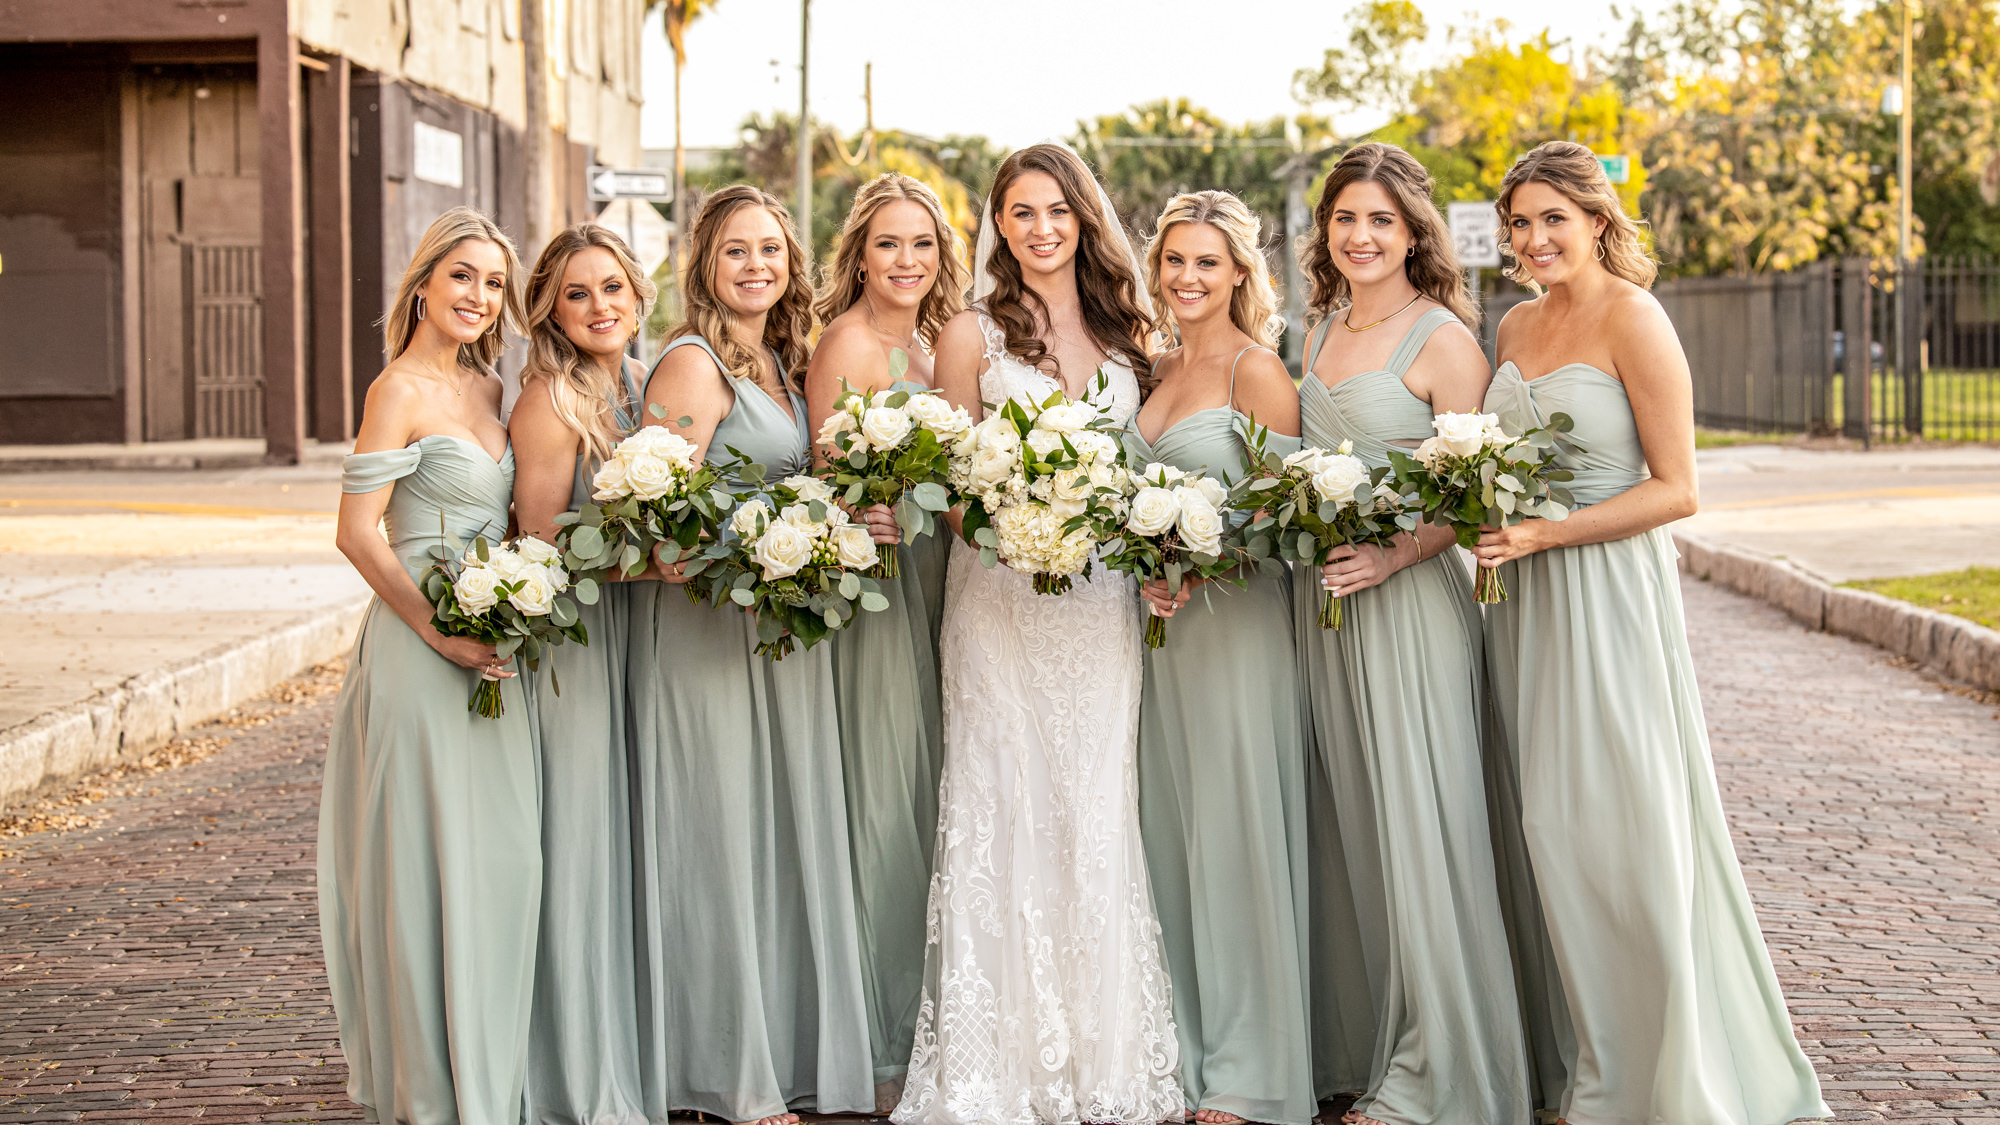 Flowing Sage Green Mismatched Bridesmaids Dresses with White and Greenery Wedding Bouquets